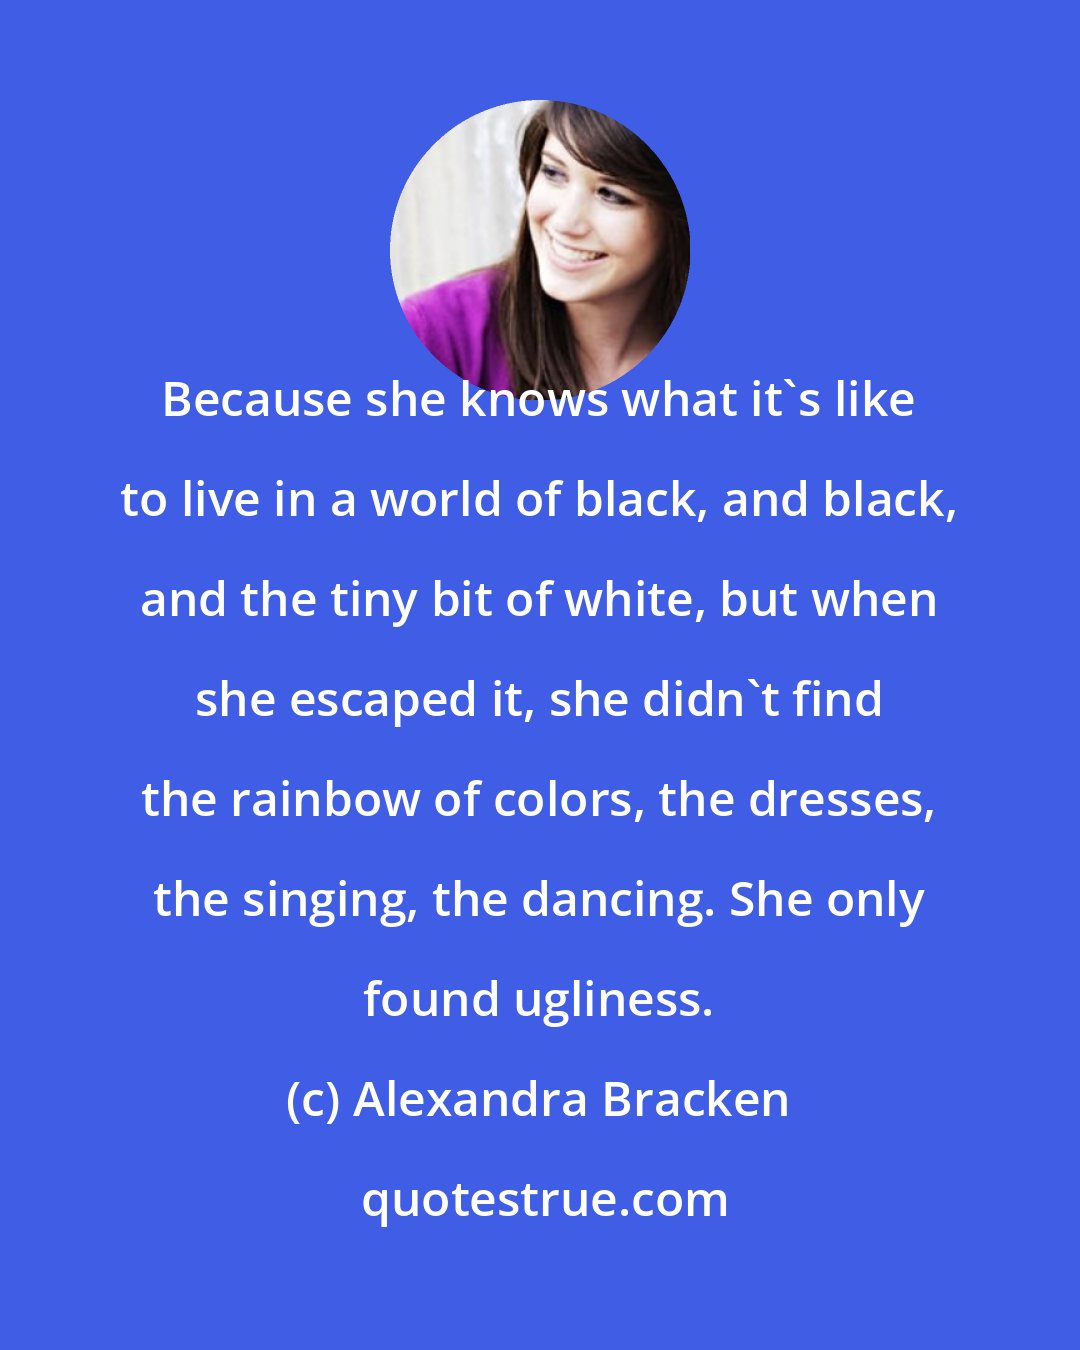 Alexandra Bracken: Because she knows what it's like to live in a world of black, and black, and the tiny bit of white, but when she escaped it, she didn't find the rainbow of colors, the dresses, the singing, the dancing. She only found ugliness.